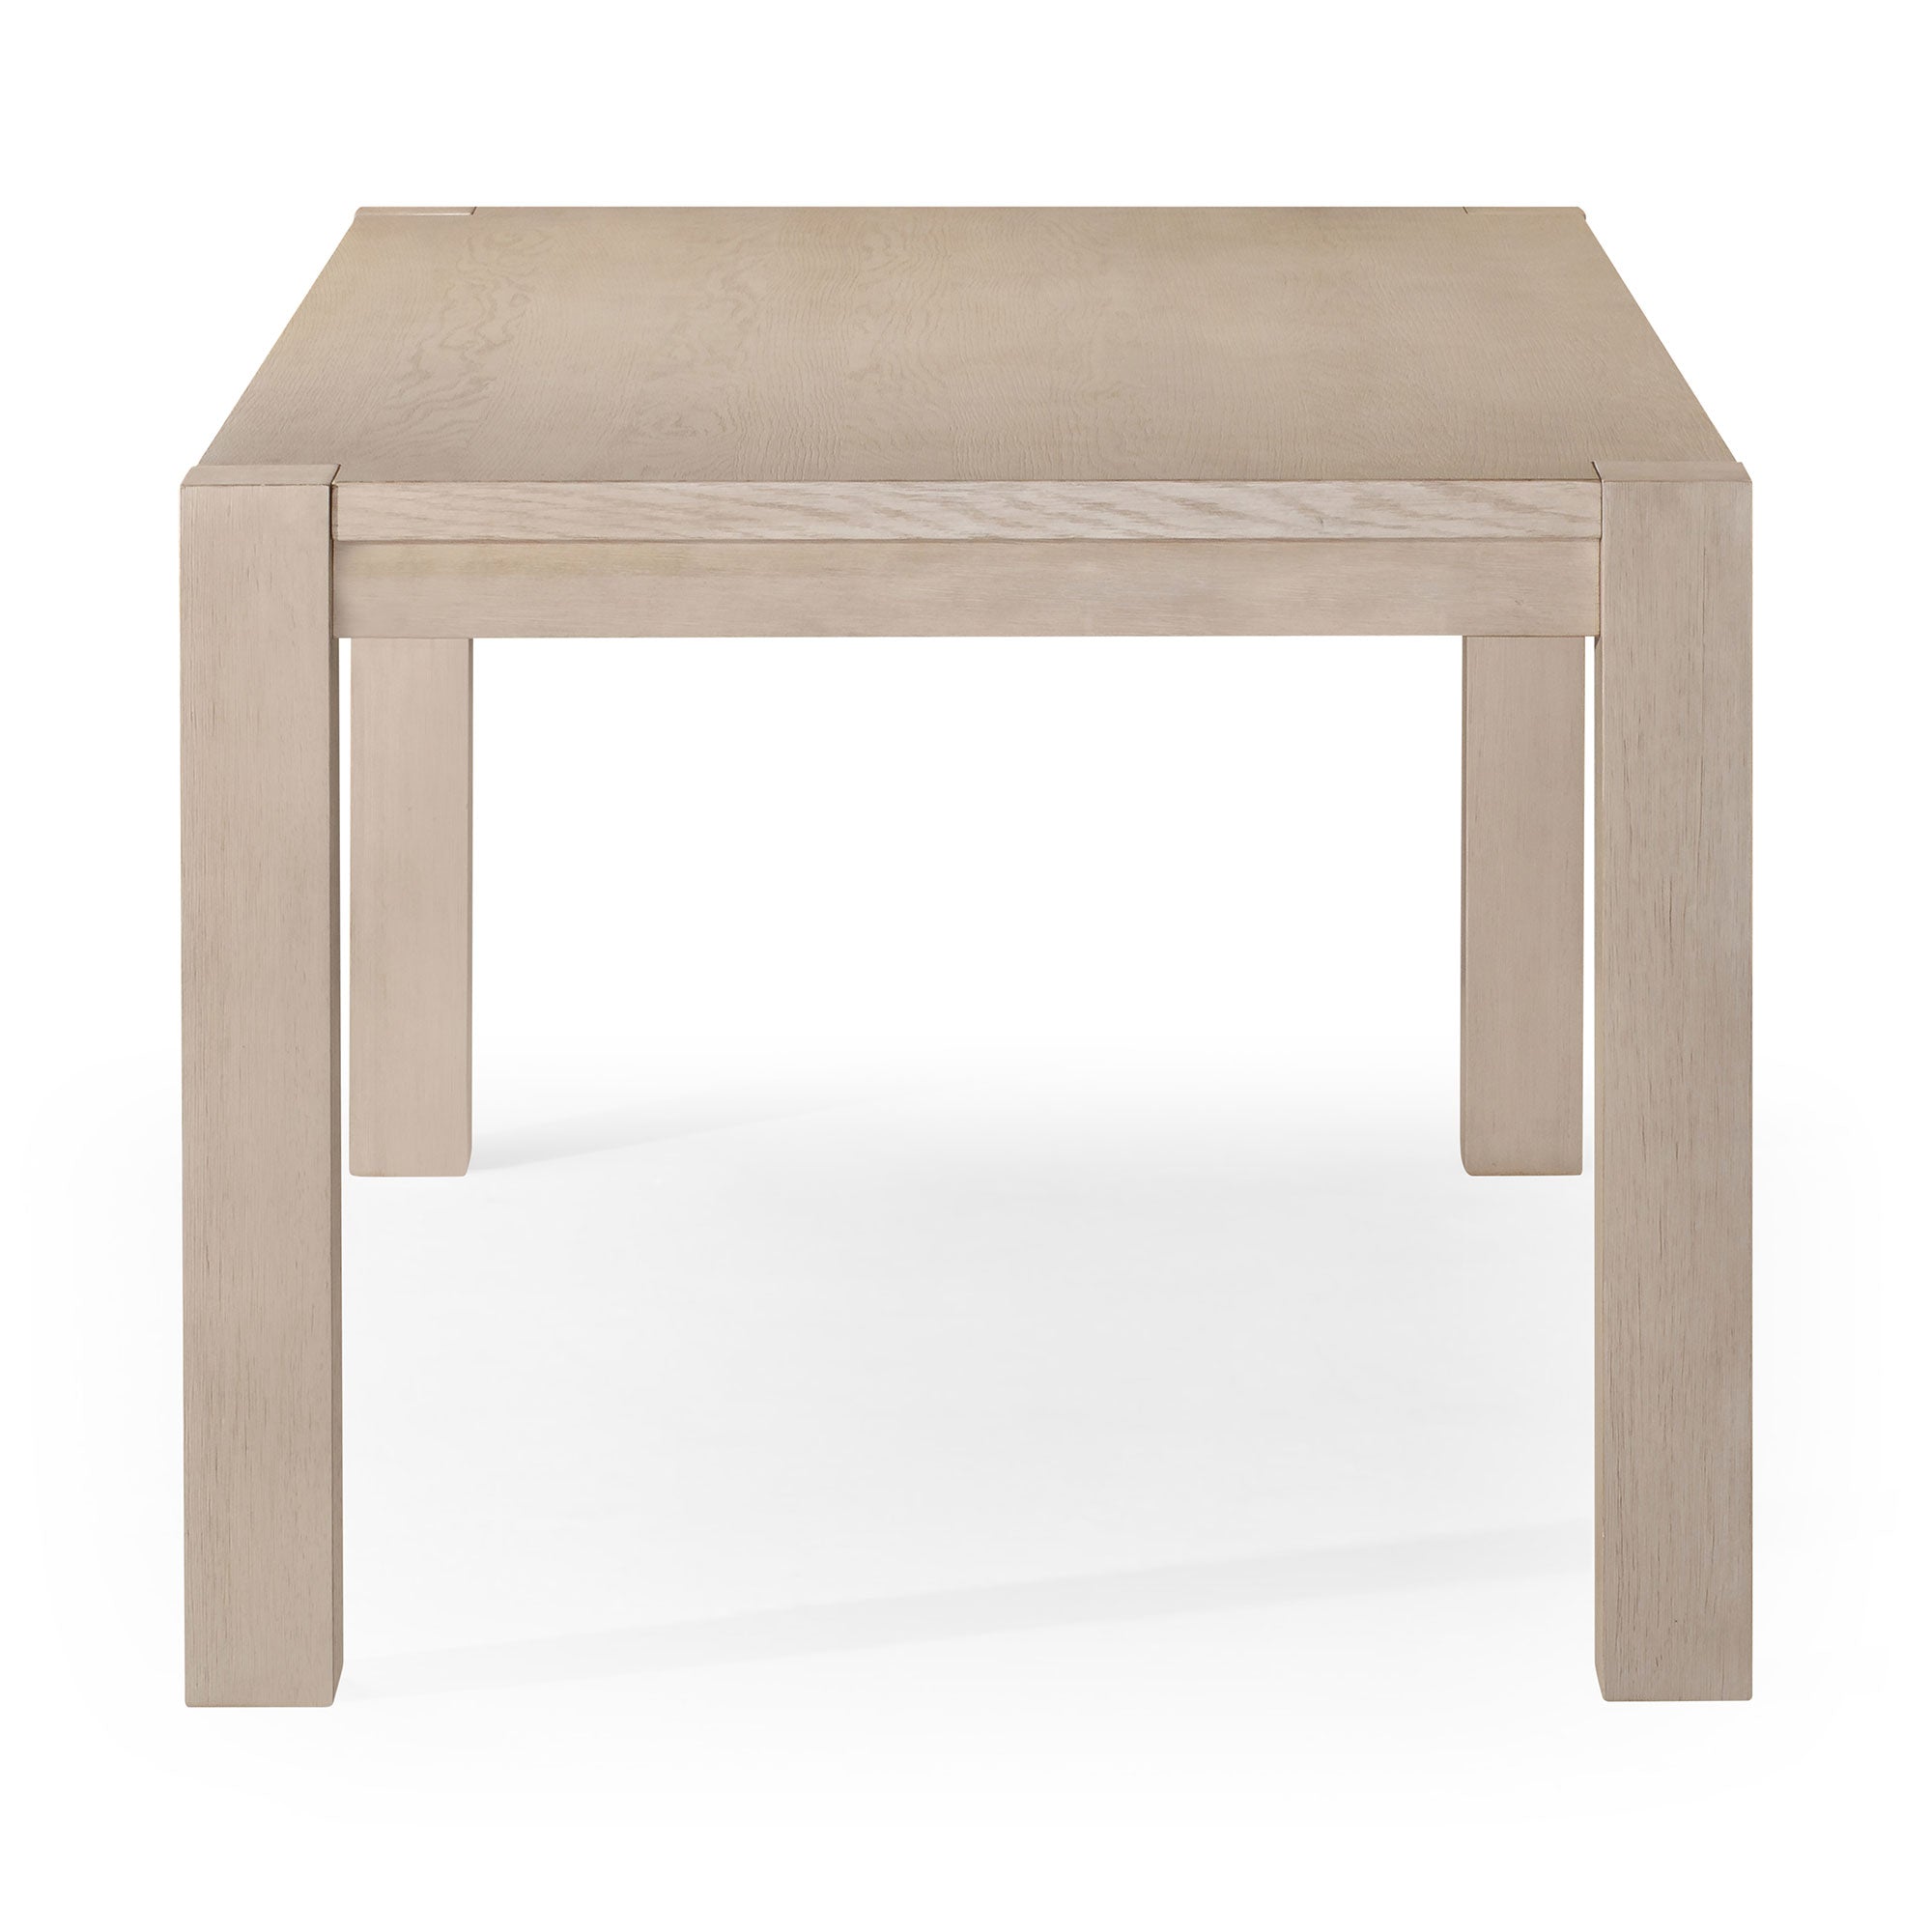 Cleo Contemporary Wooden Dining Table in Refined White Finish in Dining Furniture by Maven Lane